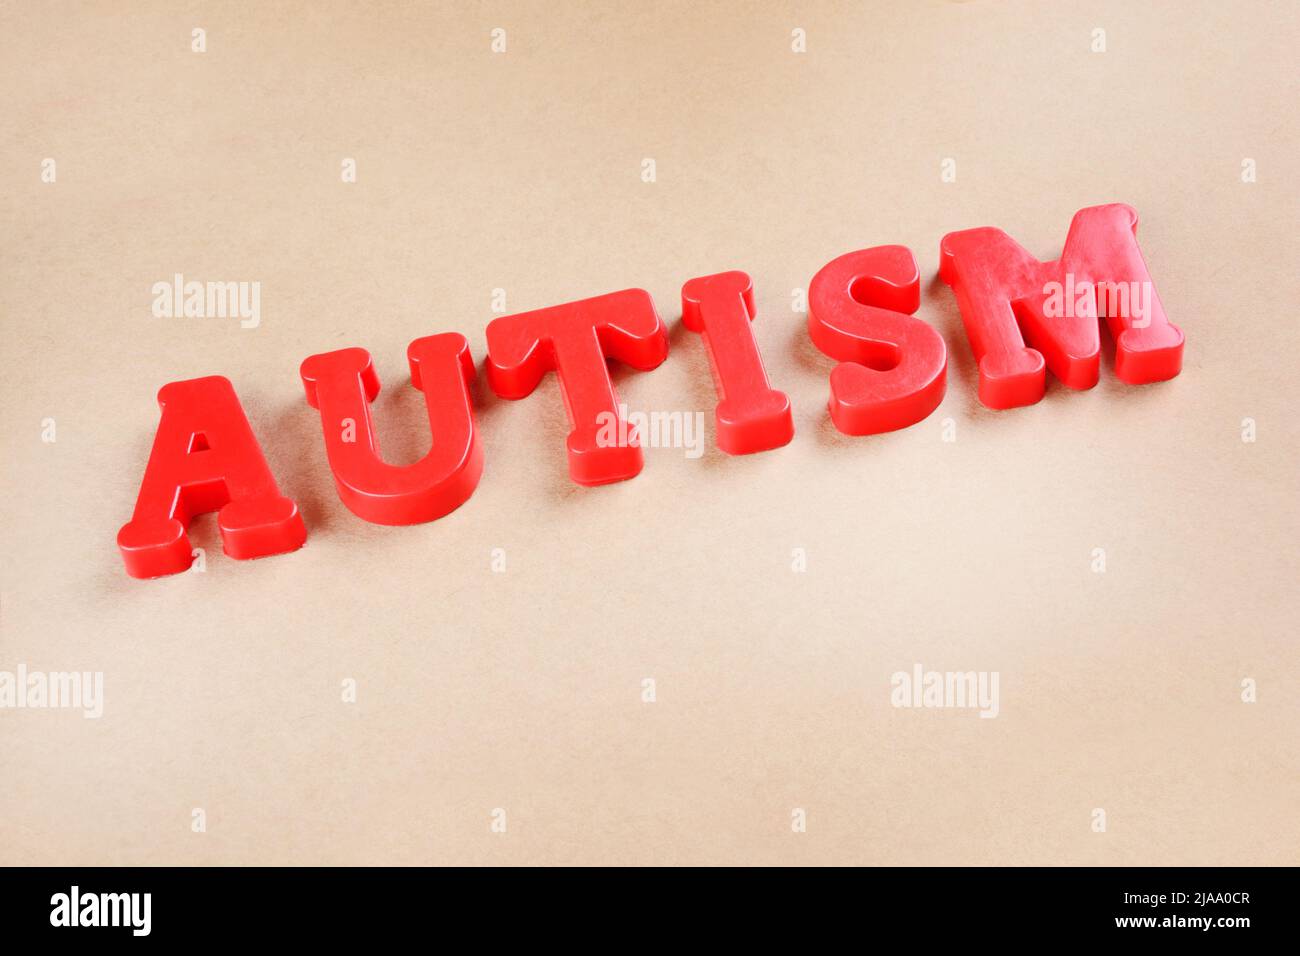 Word Autism made with red letters on background Stock Photo